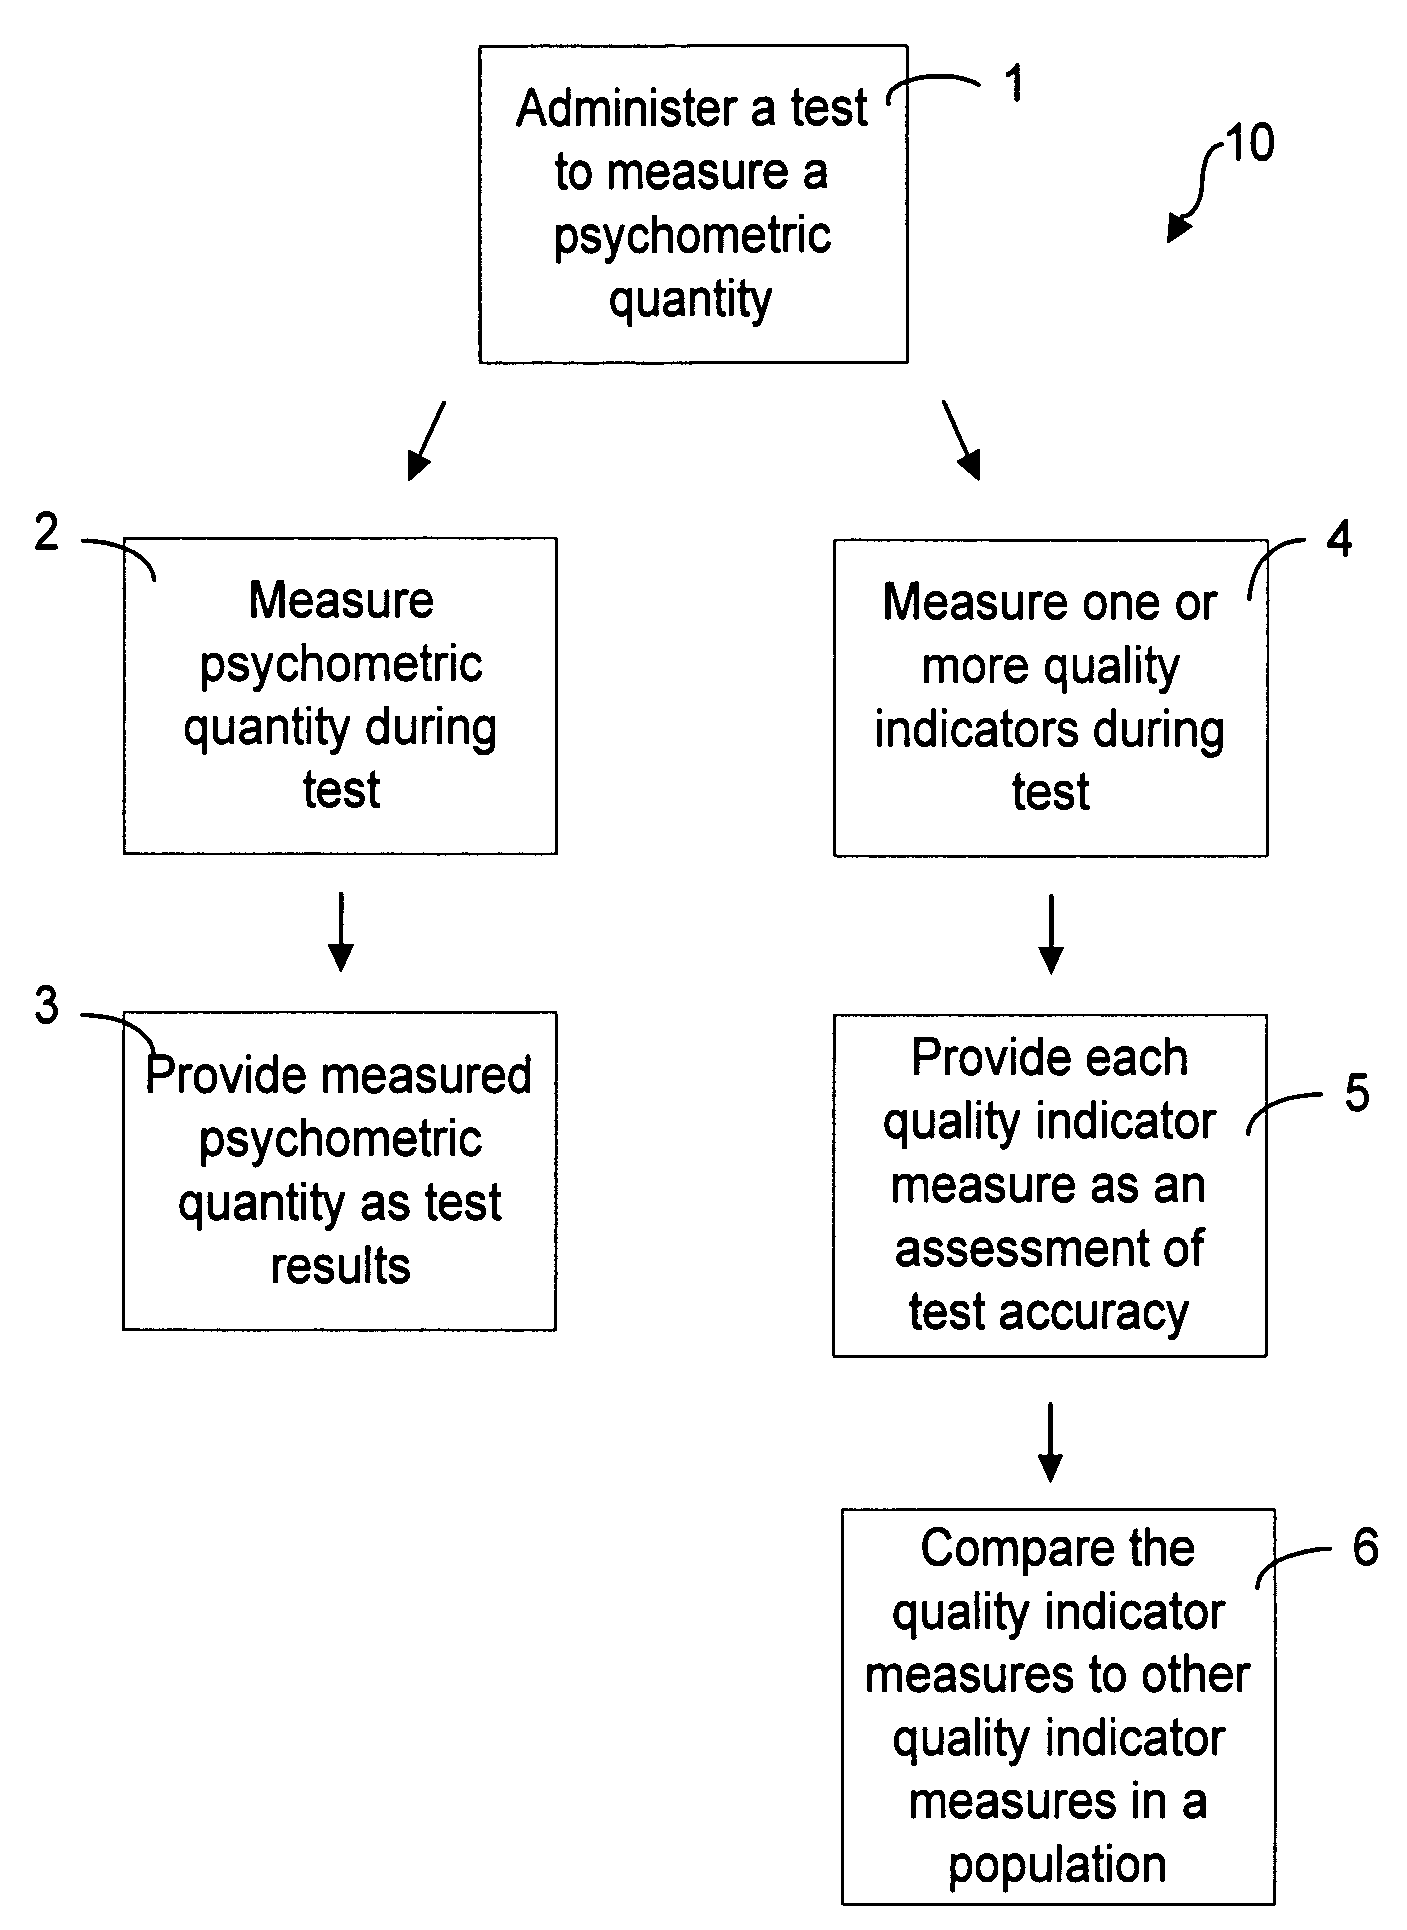 Method for assessing the accuracy of test results